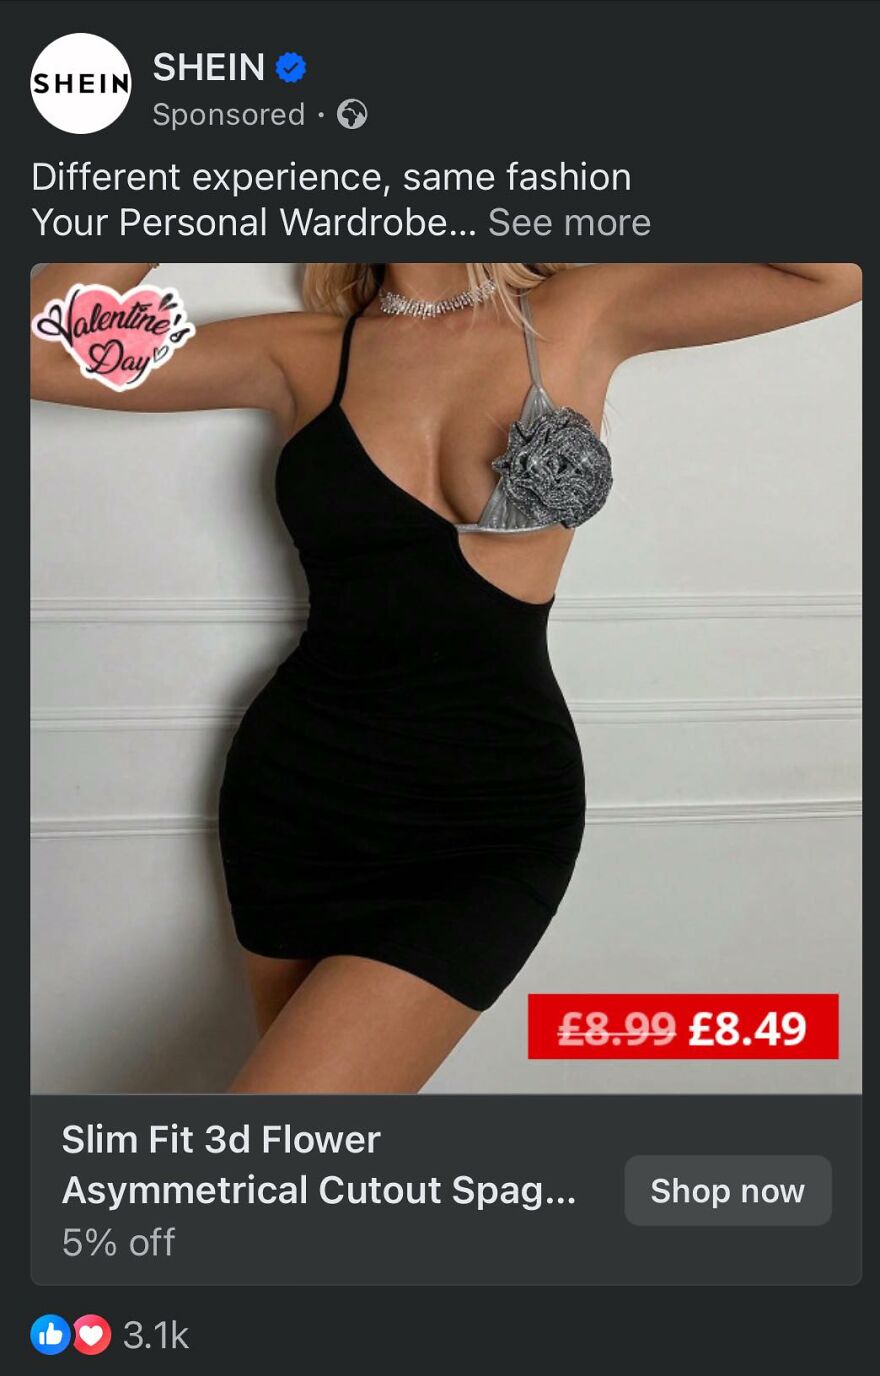 At Least It Only Costs £8.49 I Guess 🤣